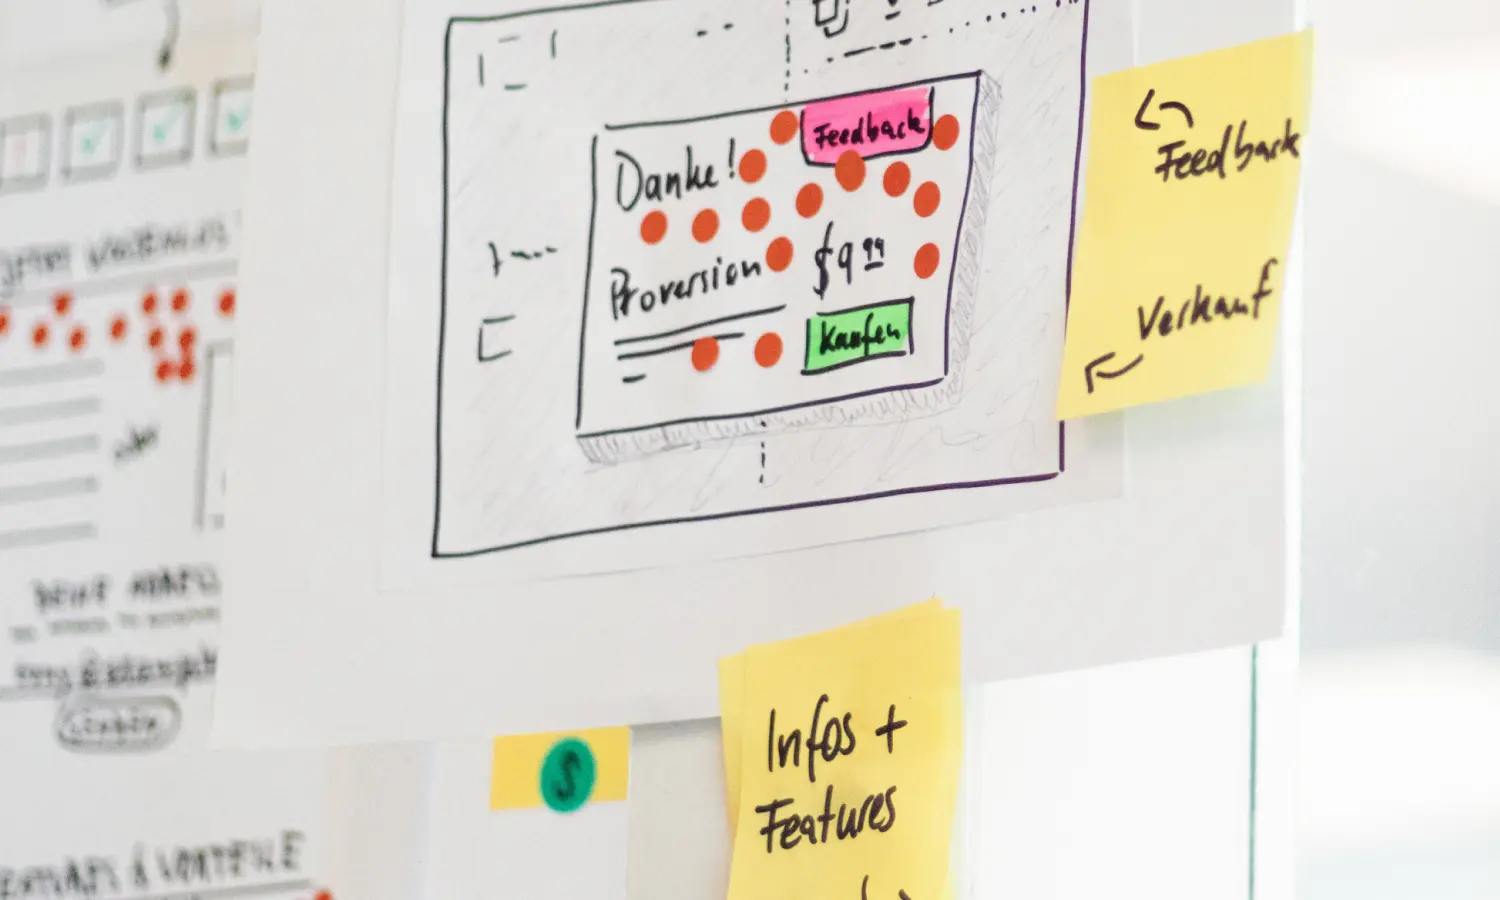 Improving your product's Information Architecture (IA) for better UX